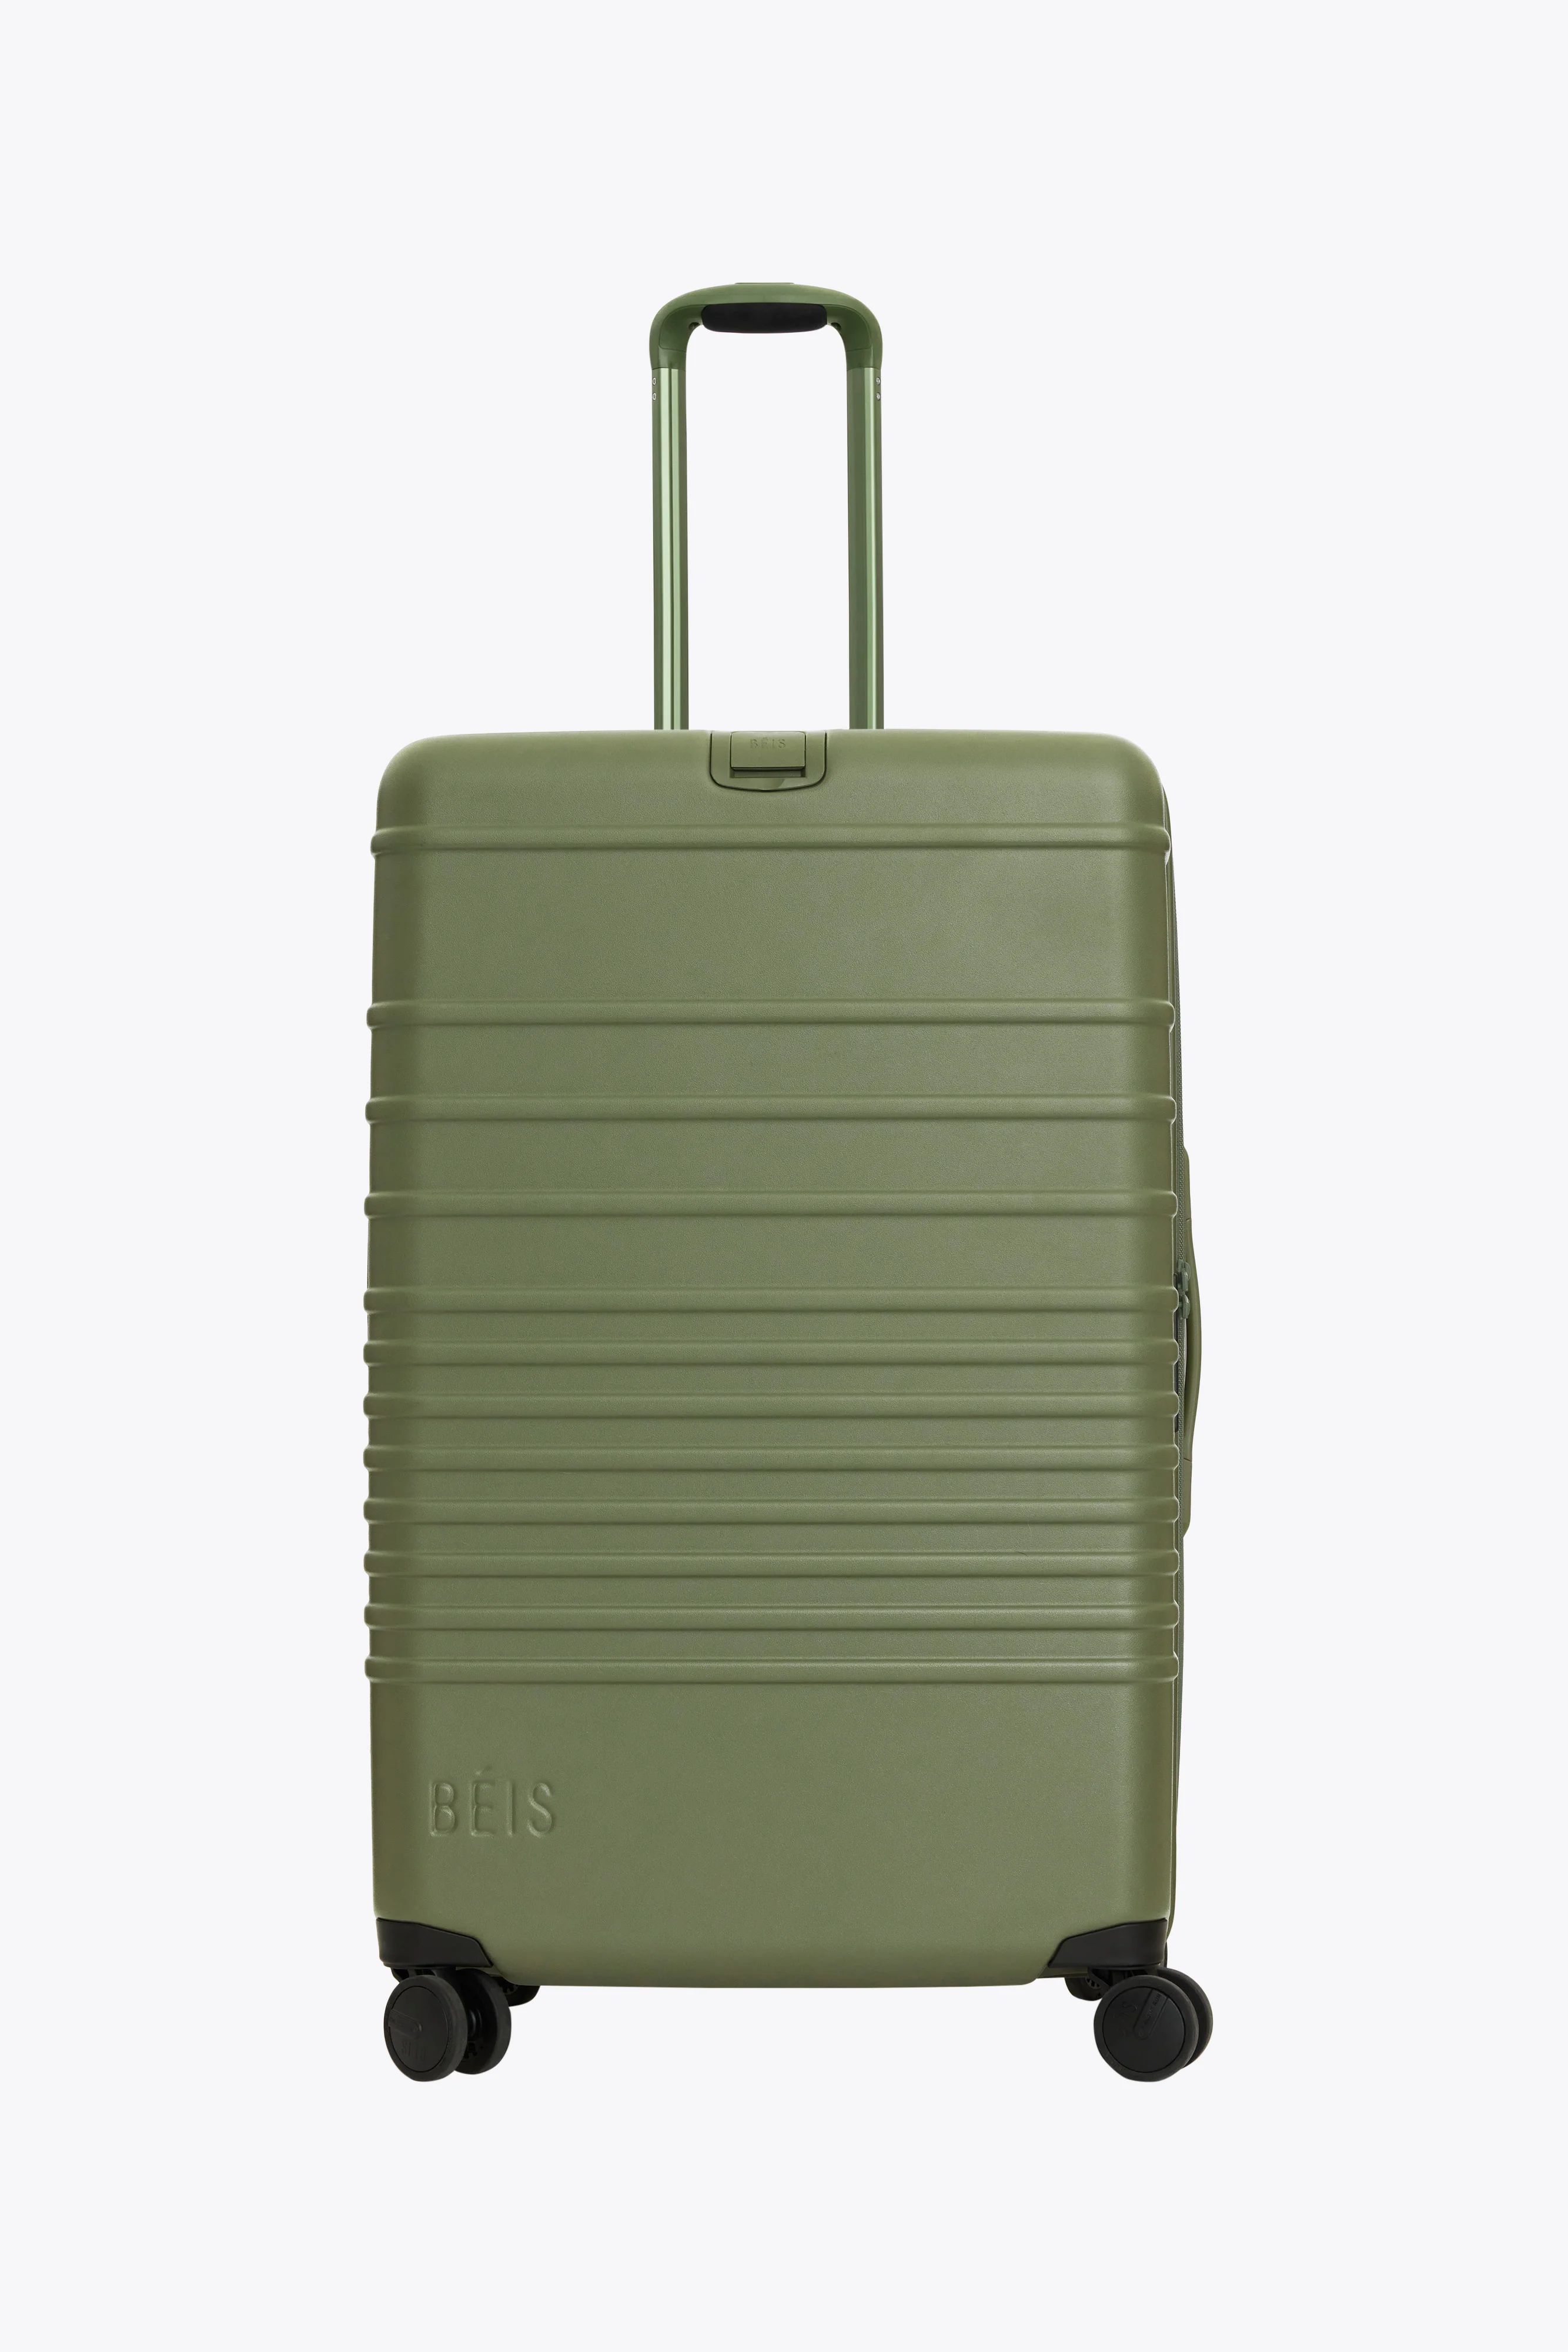 The Large Check-In Roller in Olive | BÉIS Travel